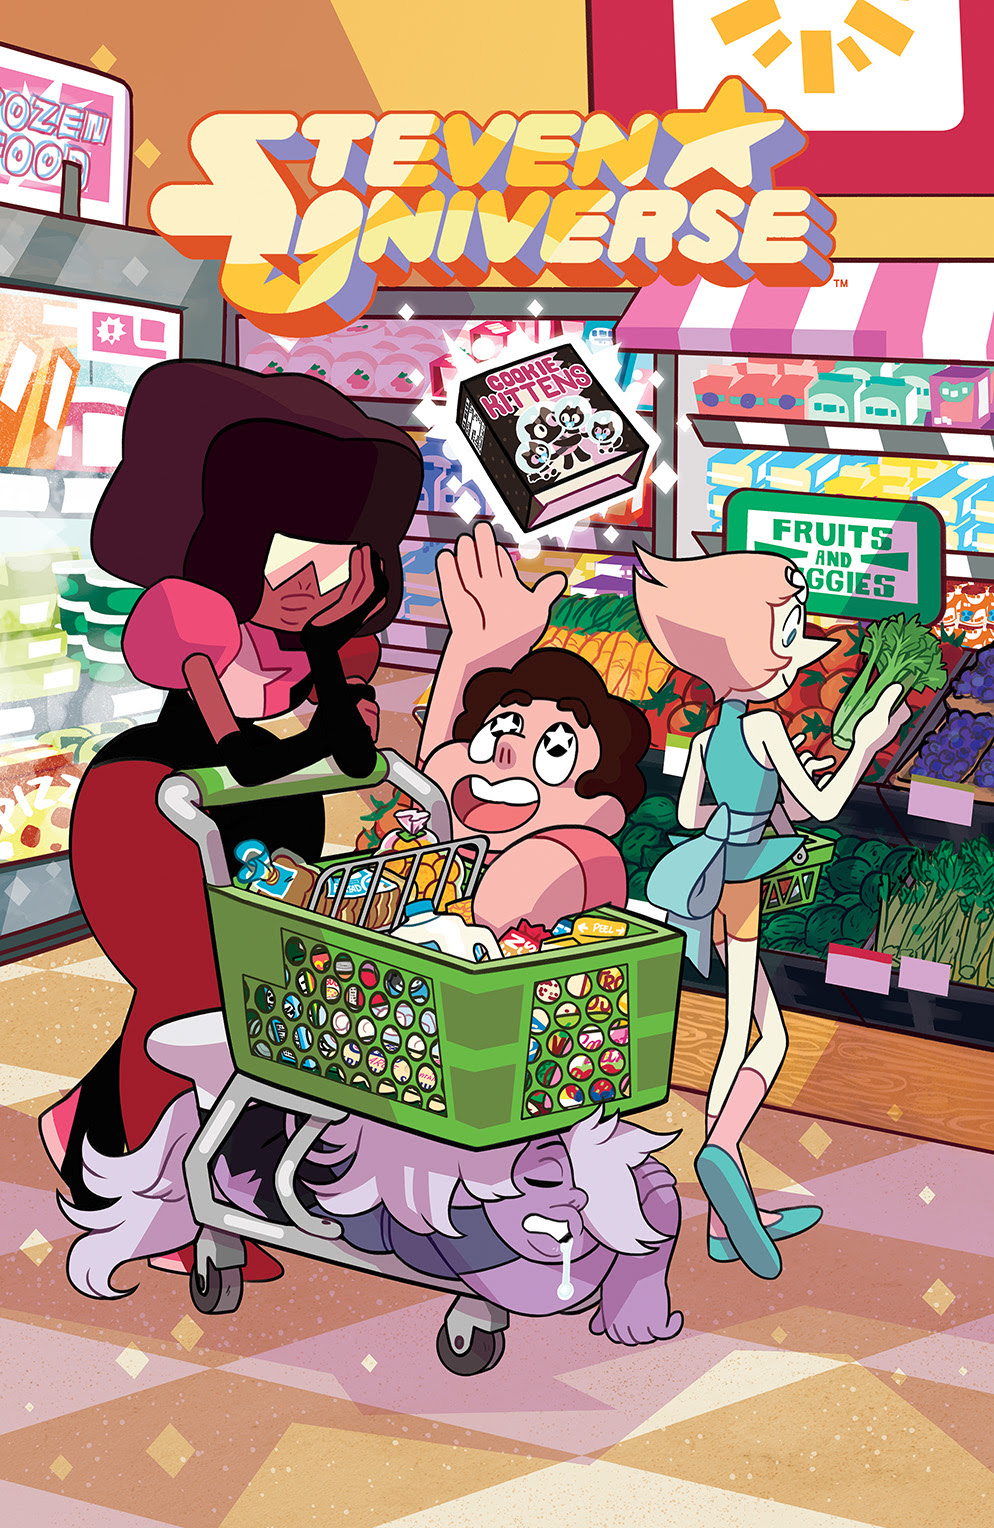 STEVEN UNIVERSE #5 Cover A by Amber Rogers